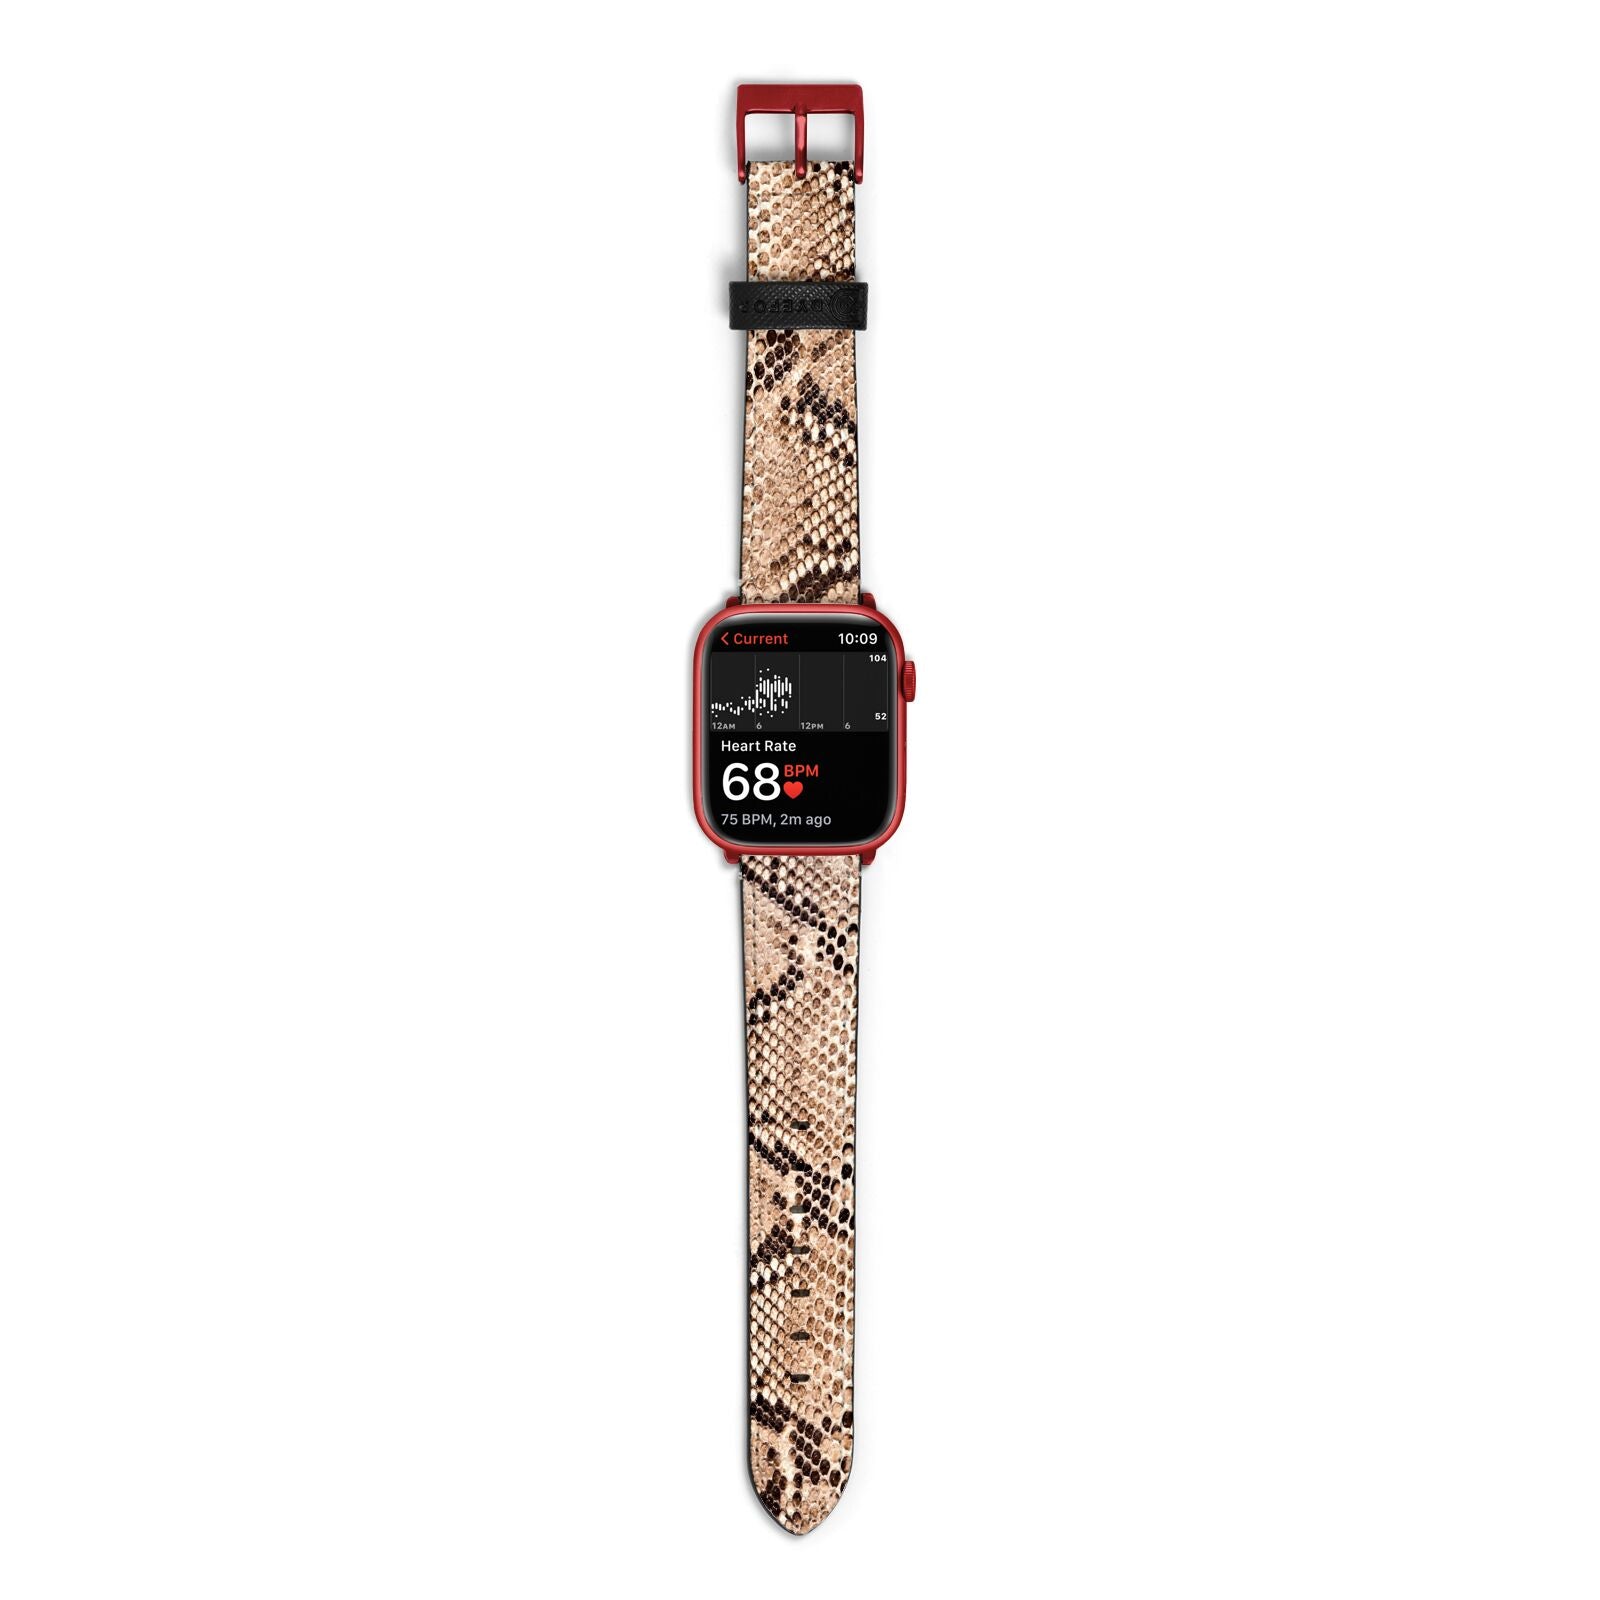 Snakeskin Apple Watch Strap Size 38mm with Red Hardware